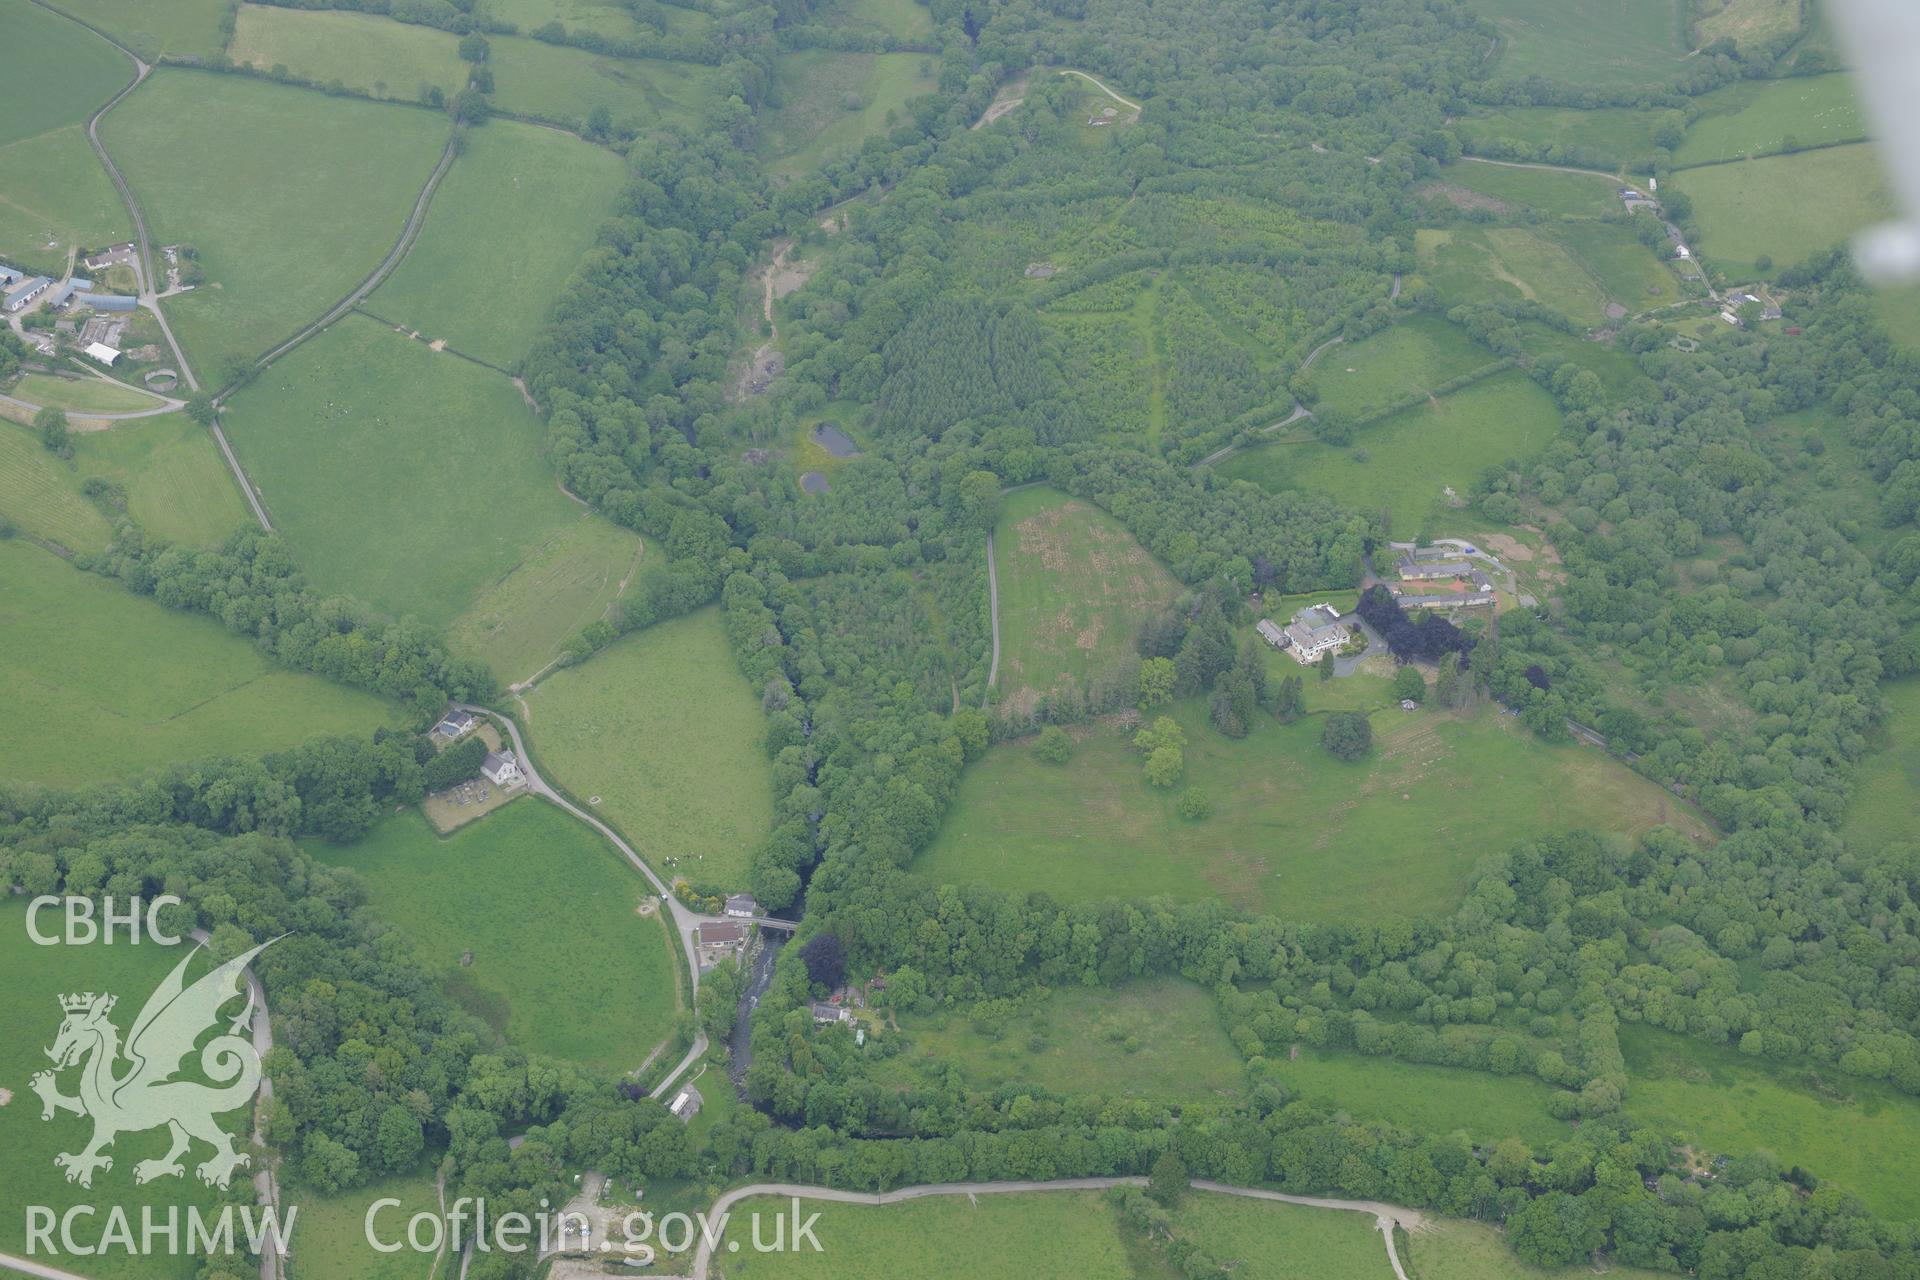 Pontynyswen Calvinistic Methodist chapel and Upton Hall, Nantgaredig. Oblique aerial photograph taken during the Royal Commission's programme of archaeological aerial reconnaissance by Toby Driver on 11th June 2015.